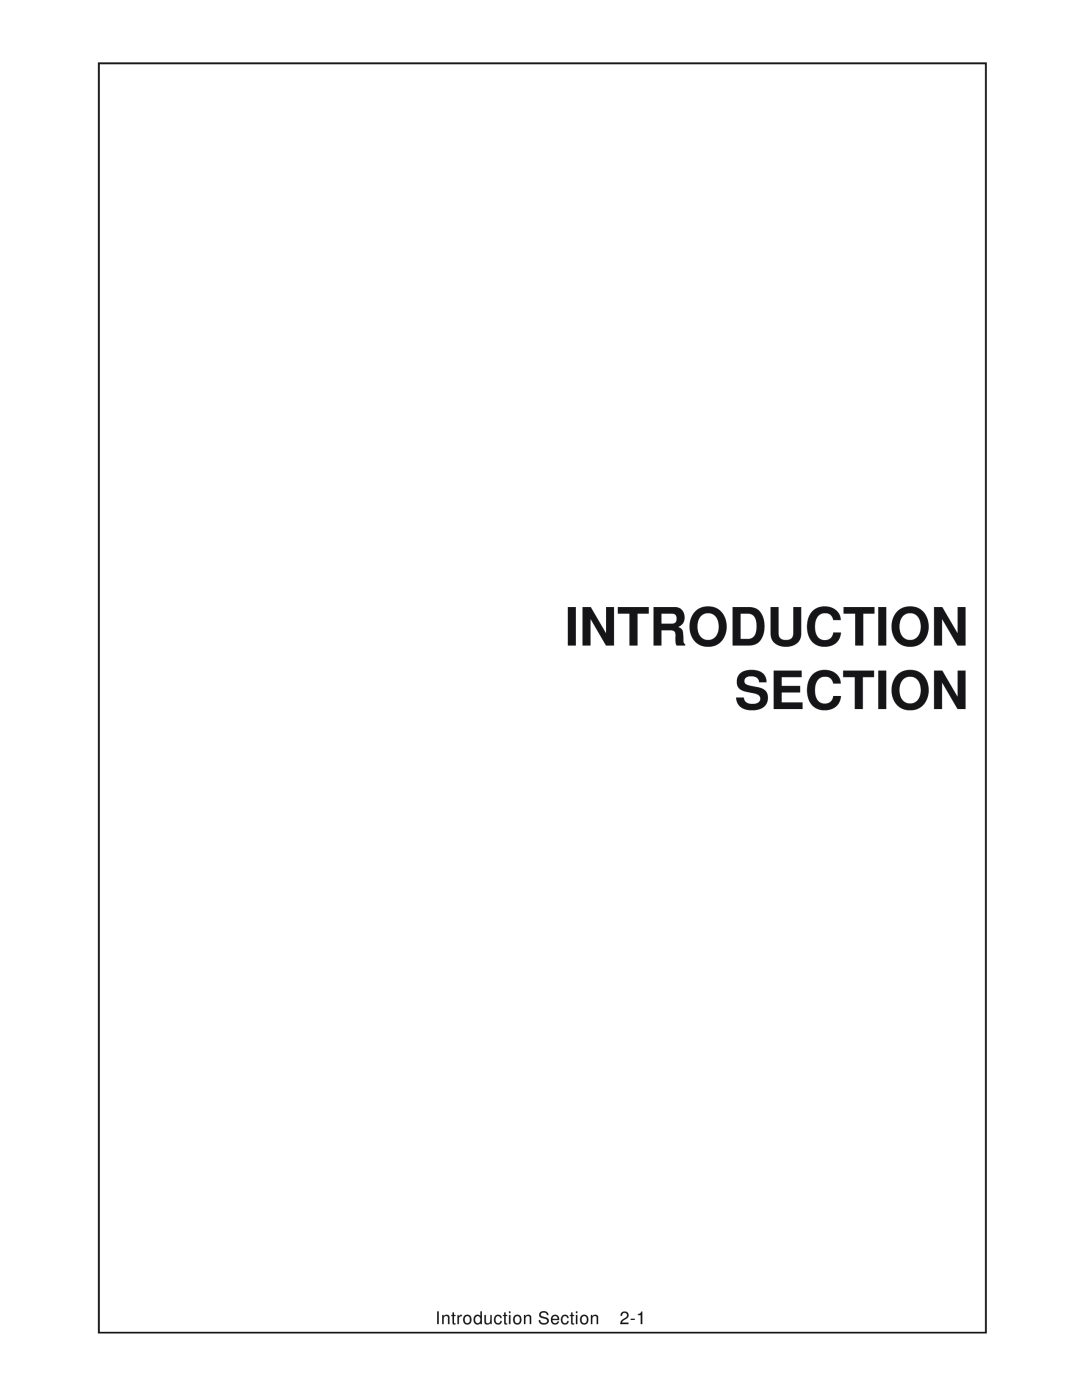 Tiger Products Co., Ltd RBF-12C manual Introduction Section 